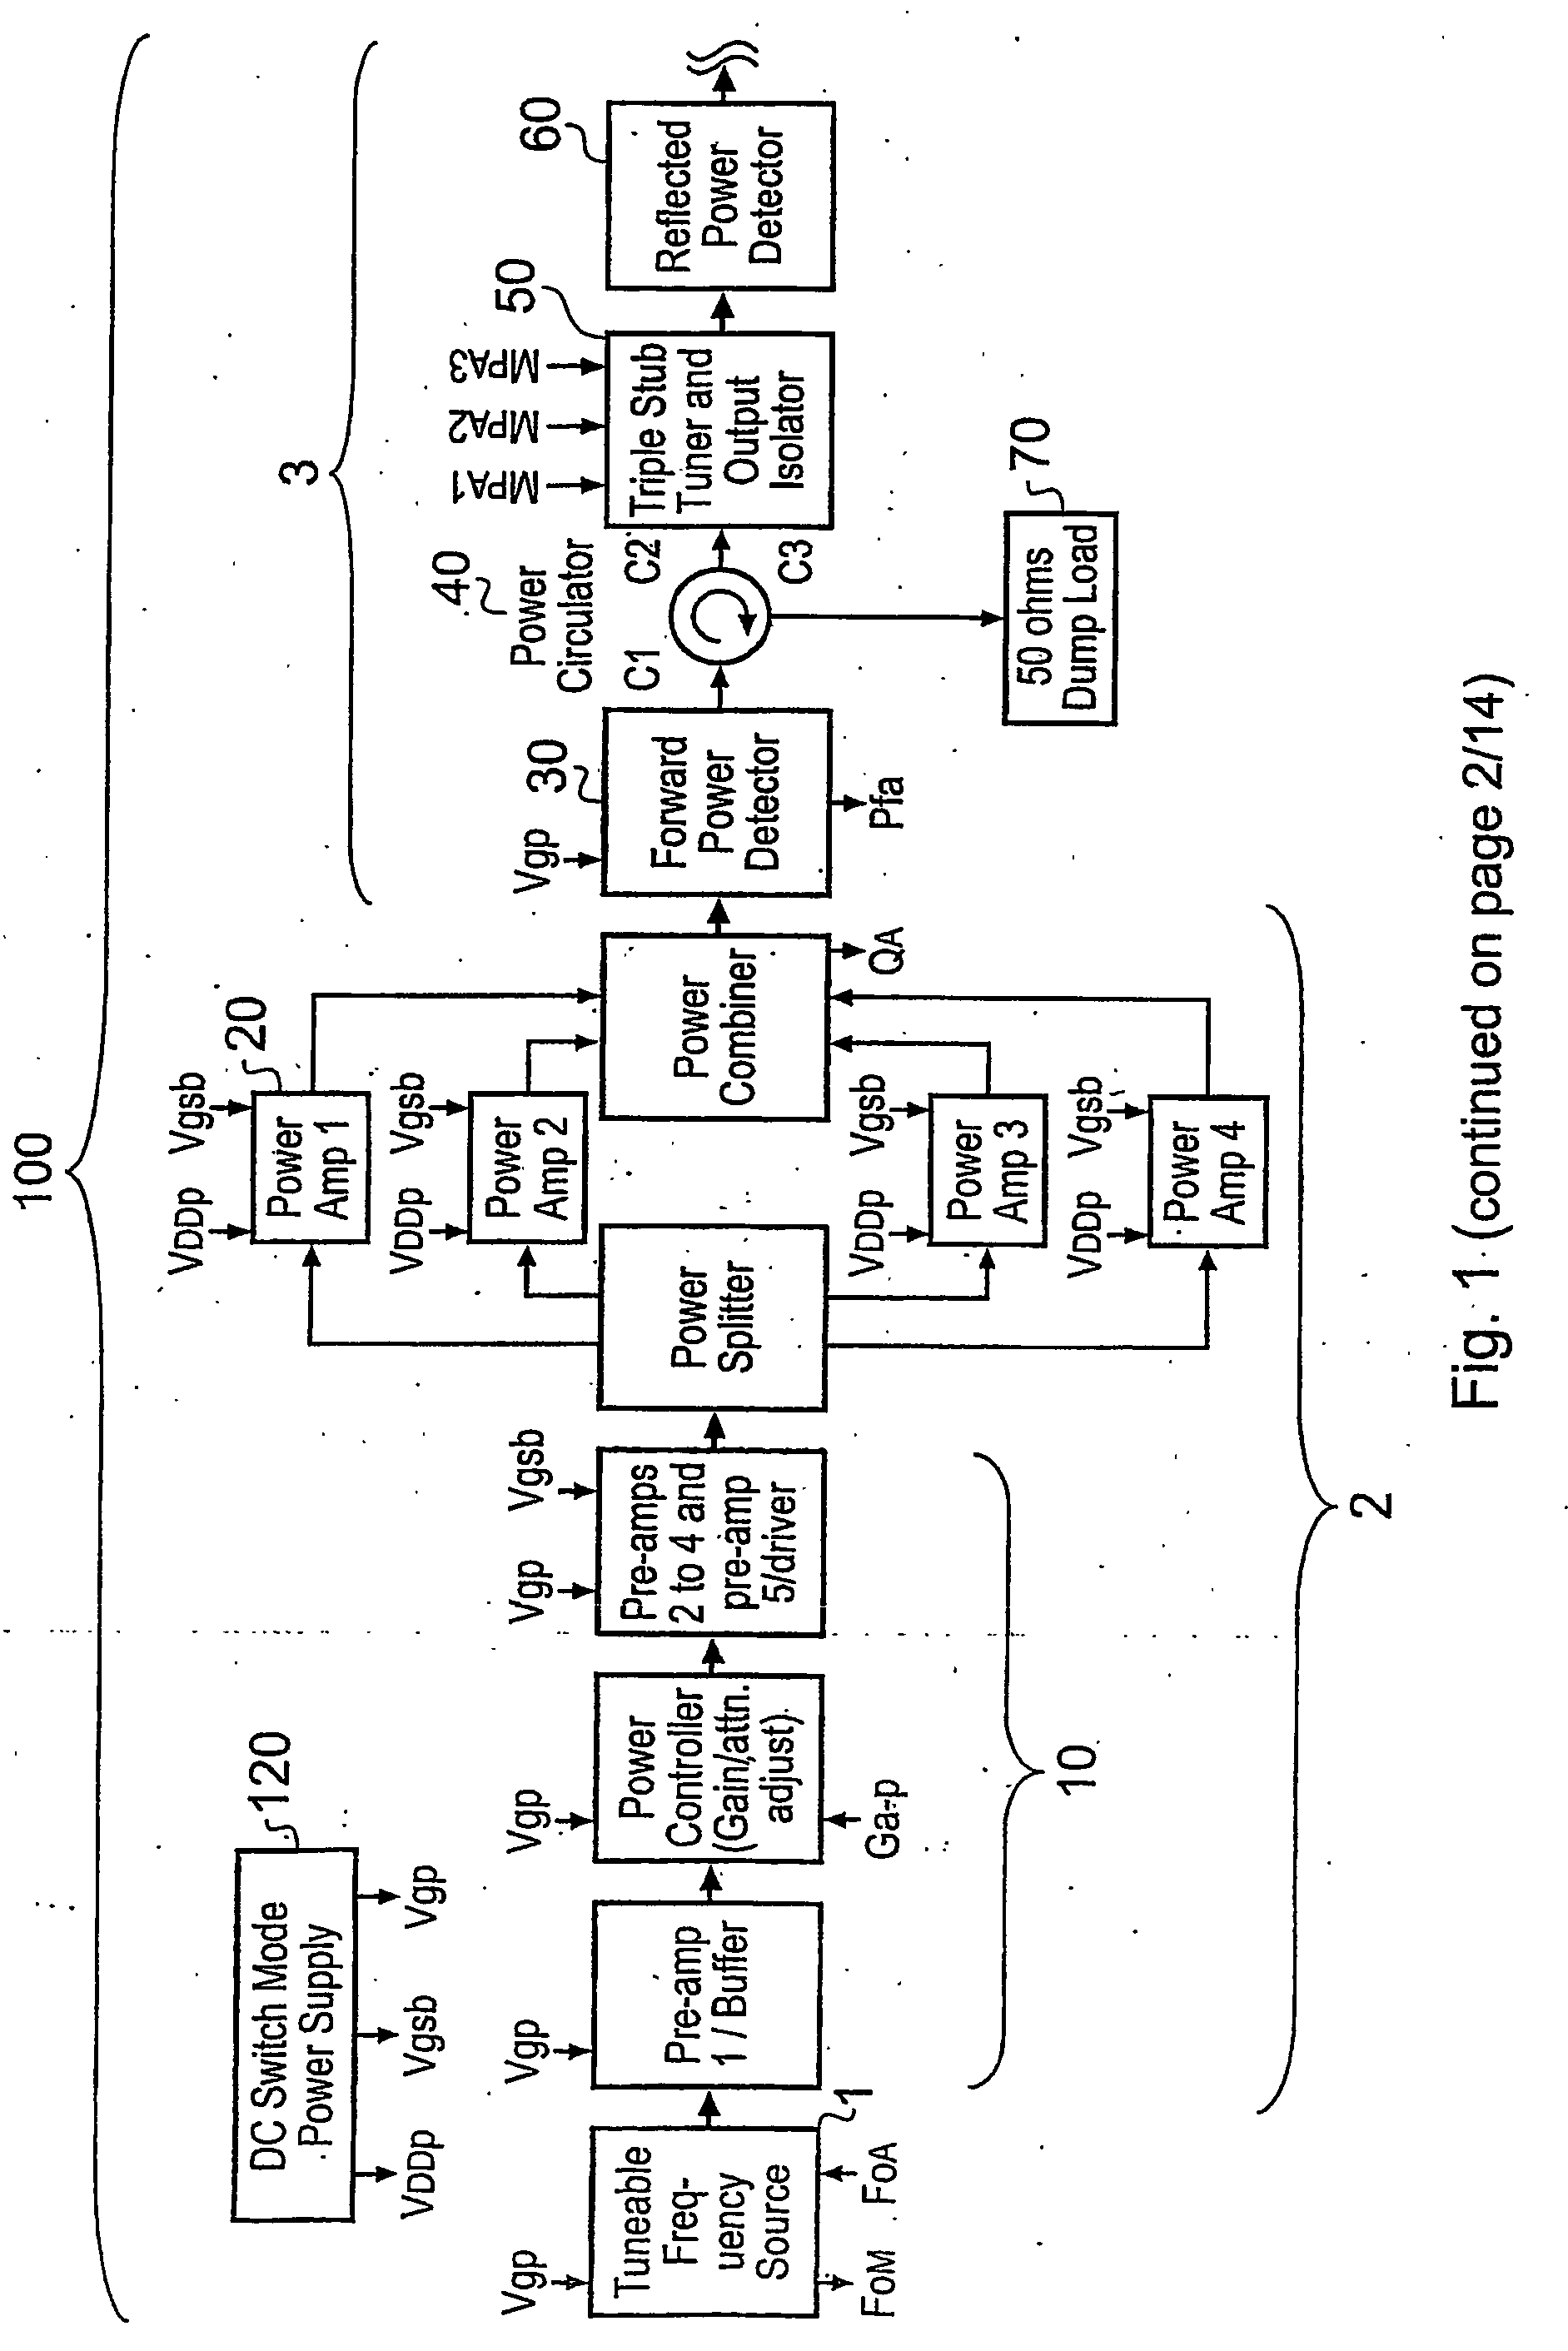 Tissue ablation apparatus and method of ablating tissue